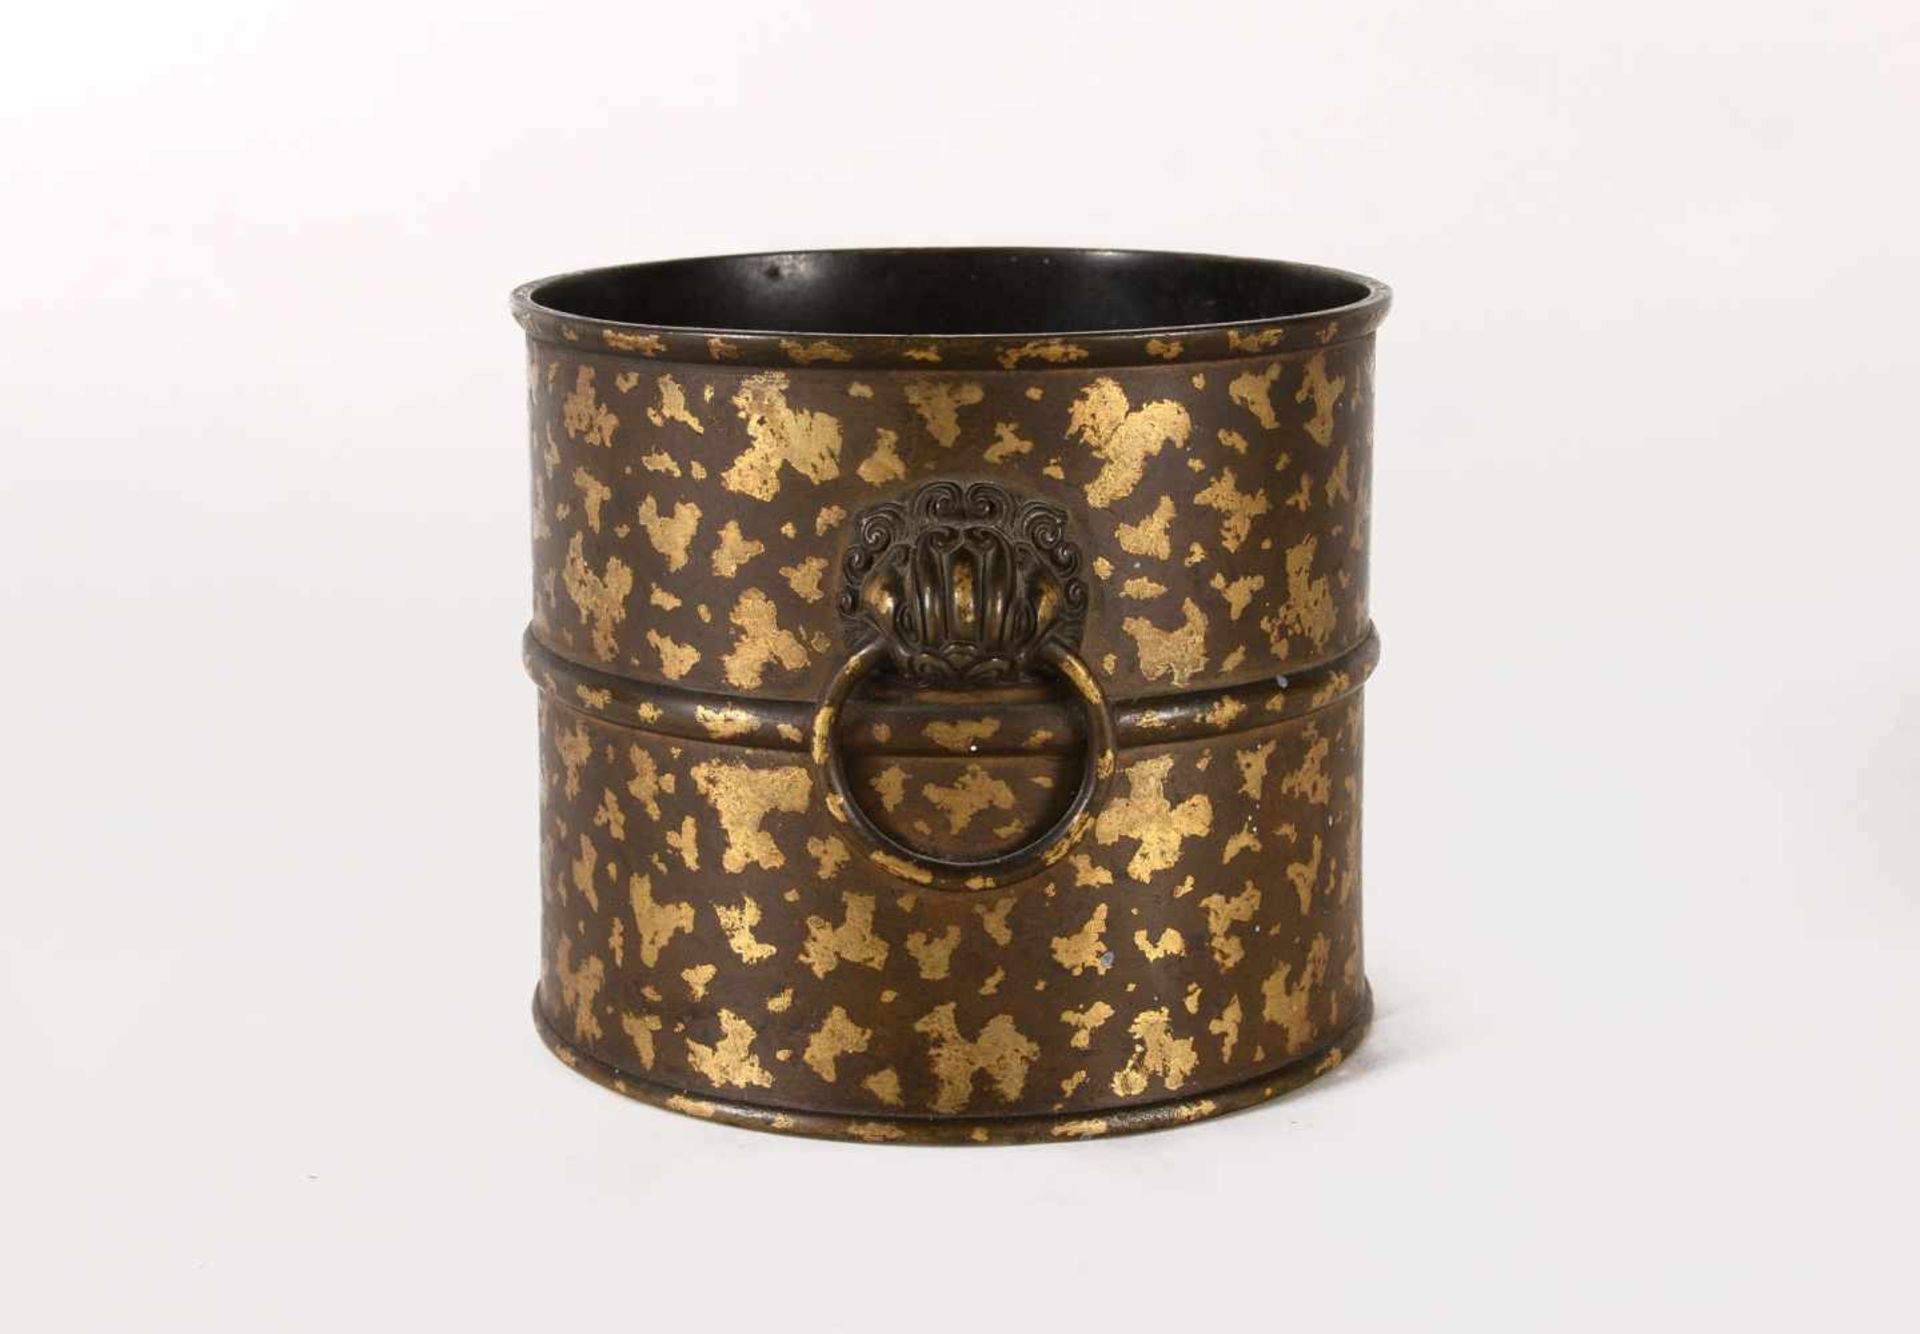 Bronze brush pot with splashes. Marked with seal mark Xuande. China, 18th century. H. 12,5 cm. Diam. - Image 2 of 4